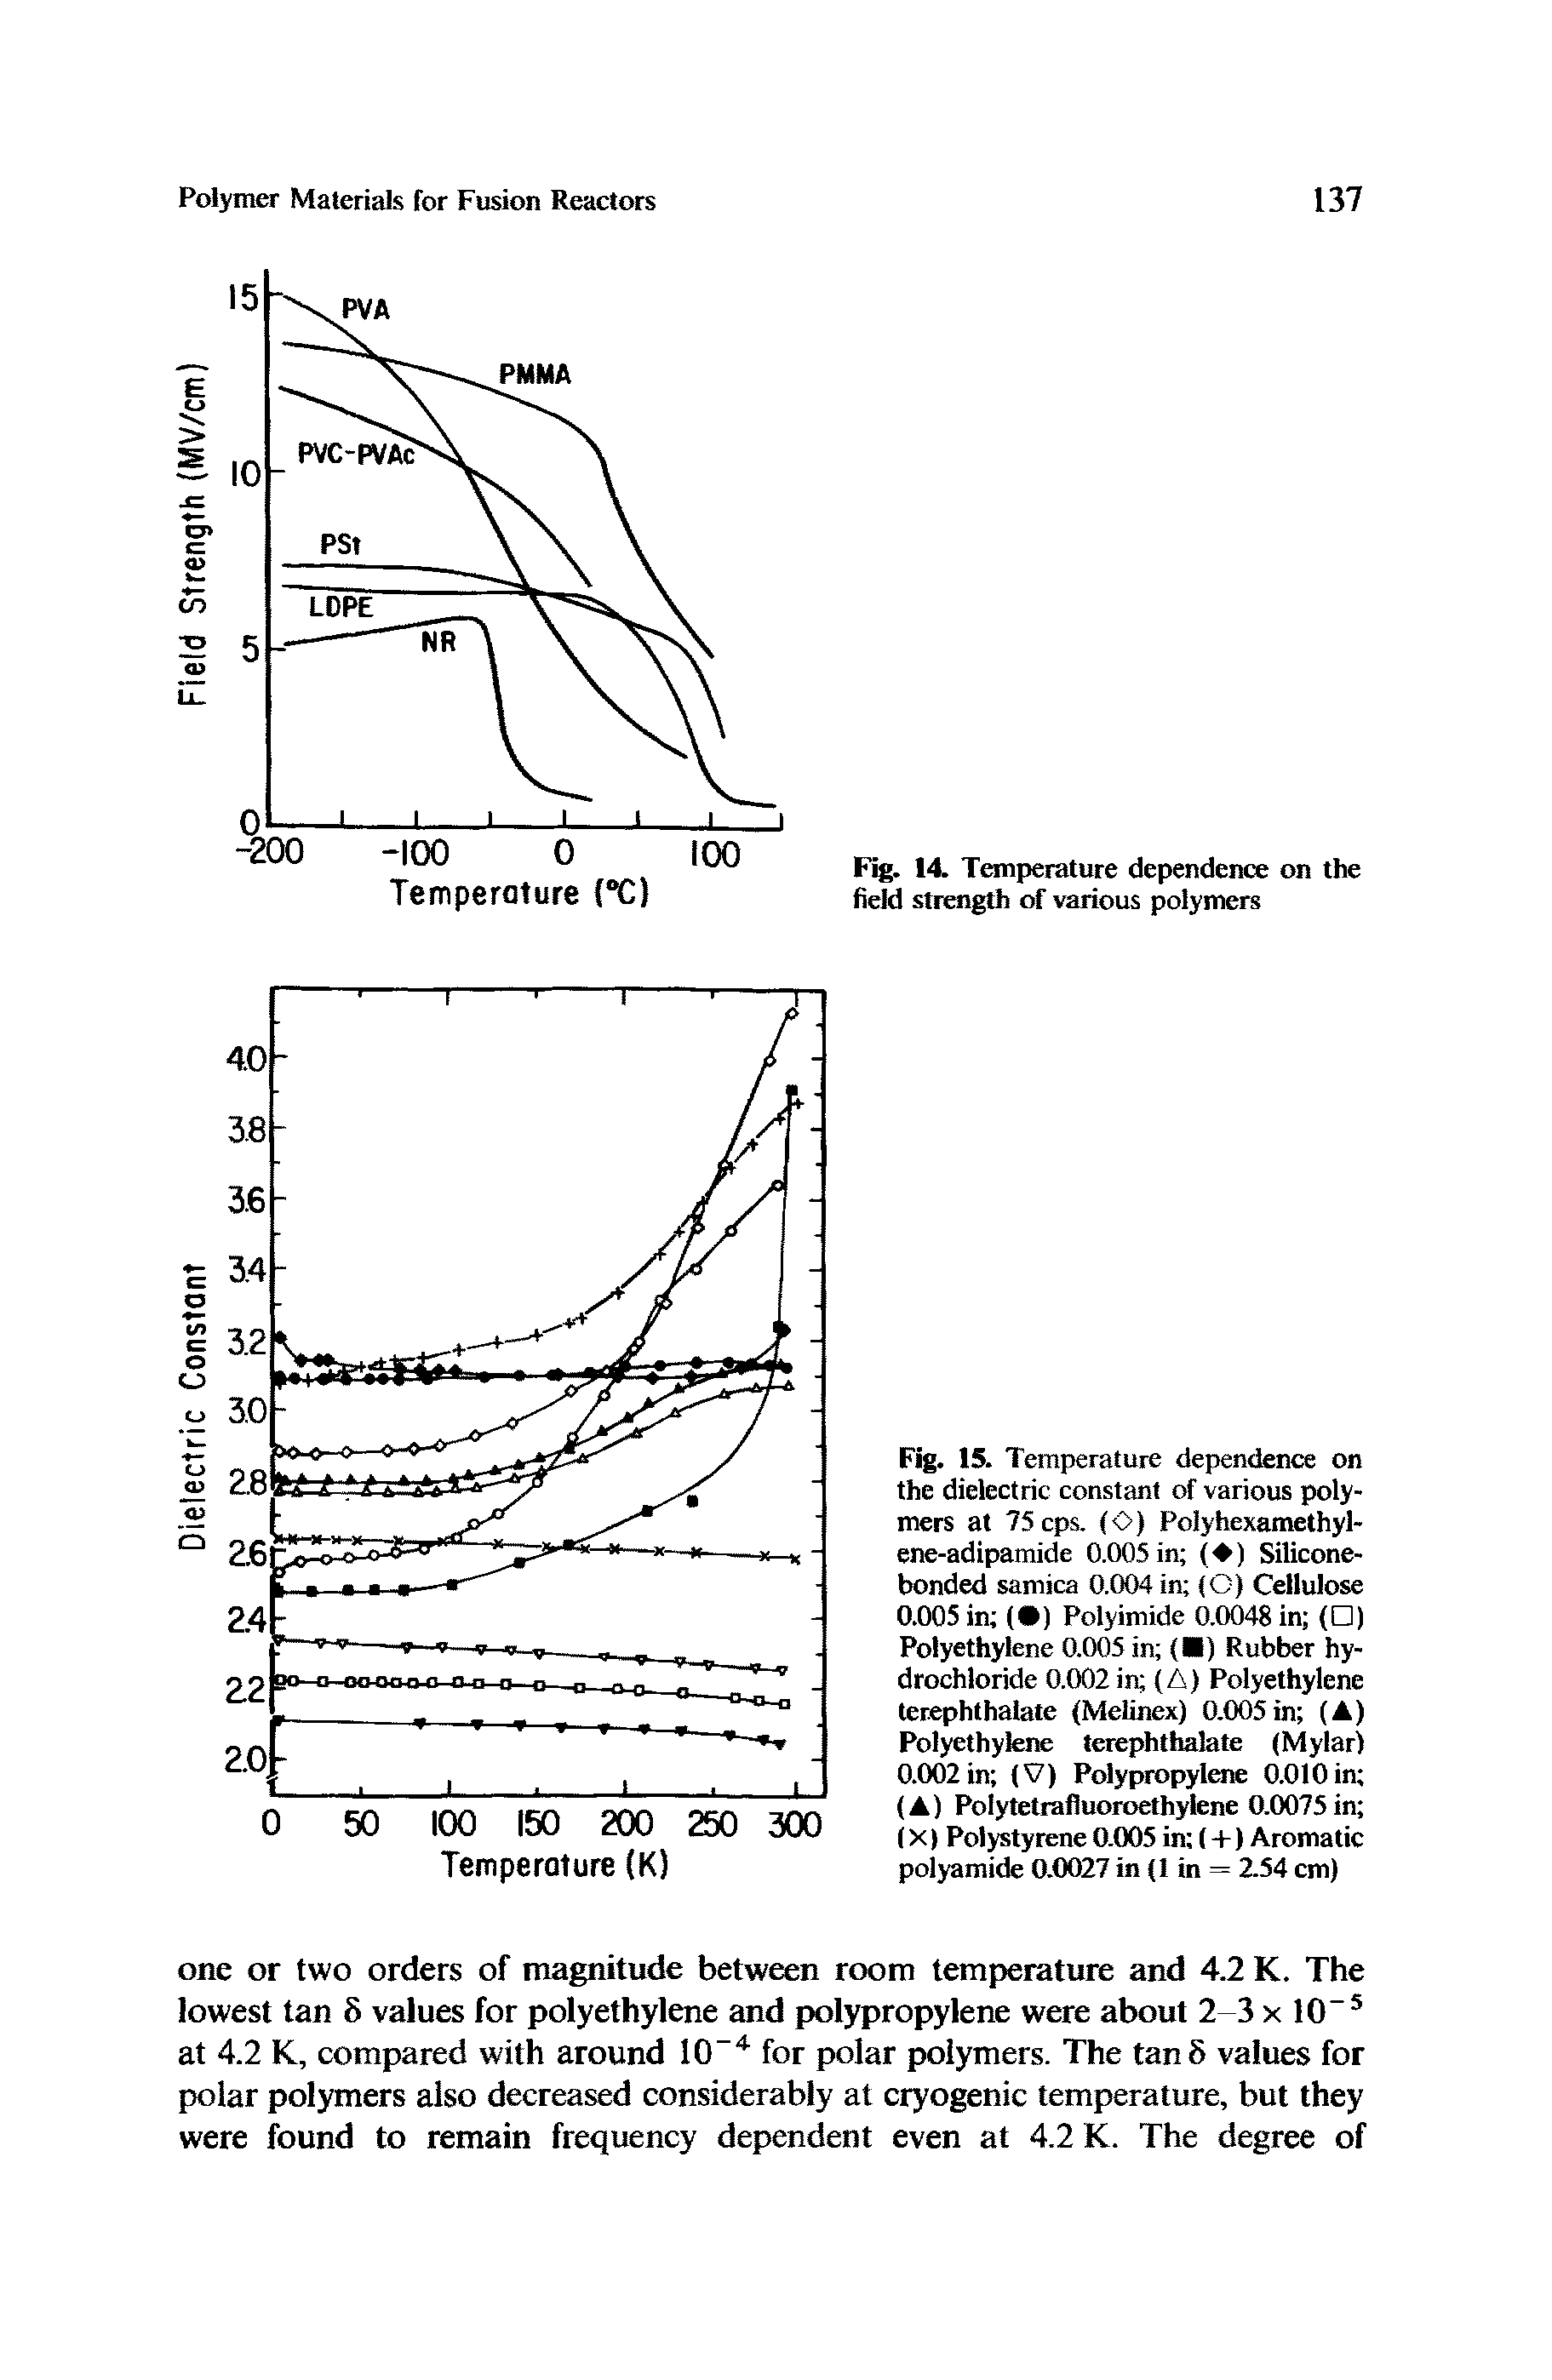 Fig. 15. Temperature dependence on the dielectric constant of various polymers at 75cps. (O) Polyhexamethyl-ene-adipamide 0.005 in ( ) Silicone-bonded samica 0.004 in (O) Cellulose 0.005 in ( ) Polyimide 0.0048 in ( ) Polyethylene 0.005 in ( ) Rubber hydrochloride 0.002 in (A) Polyethylene terephthalate (Melinex) 0.005 in (A) Polyethylene terephthalate (Mylar) 0.002 in (V) Polypropylene 0.010 in (A) Polytetrafluoroethylene 0.0075 in (X) Polystyrene 0.005 in (+) Aromatic polyamide 0.0027 in (1 in = 2.54 cm)...